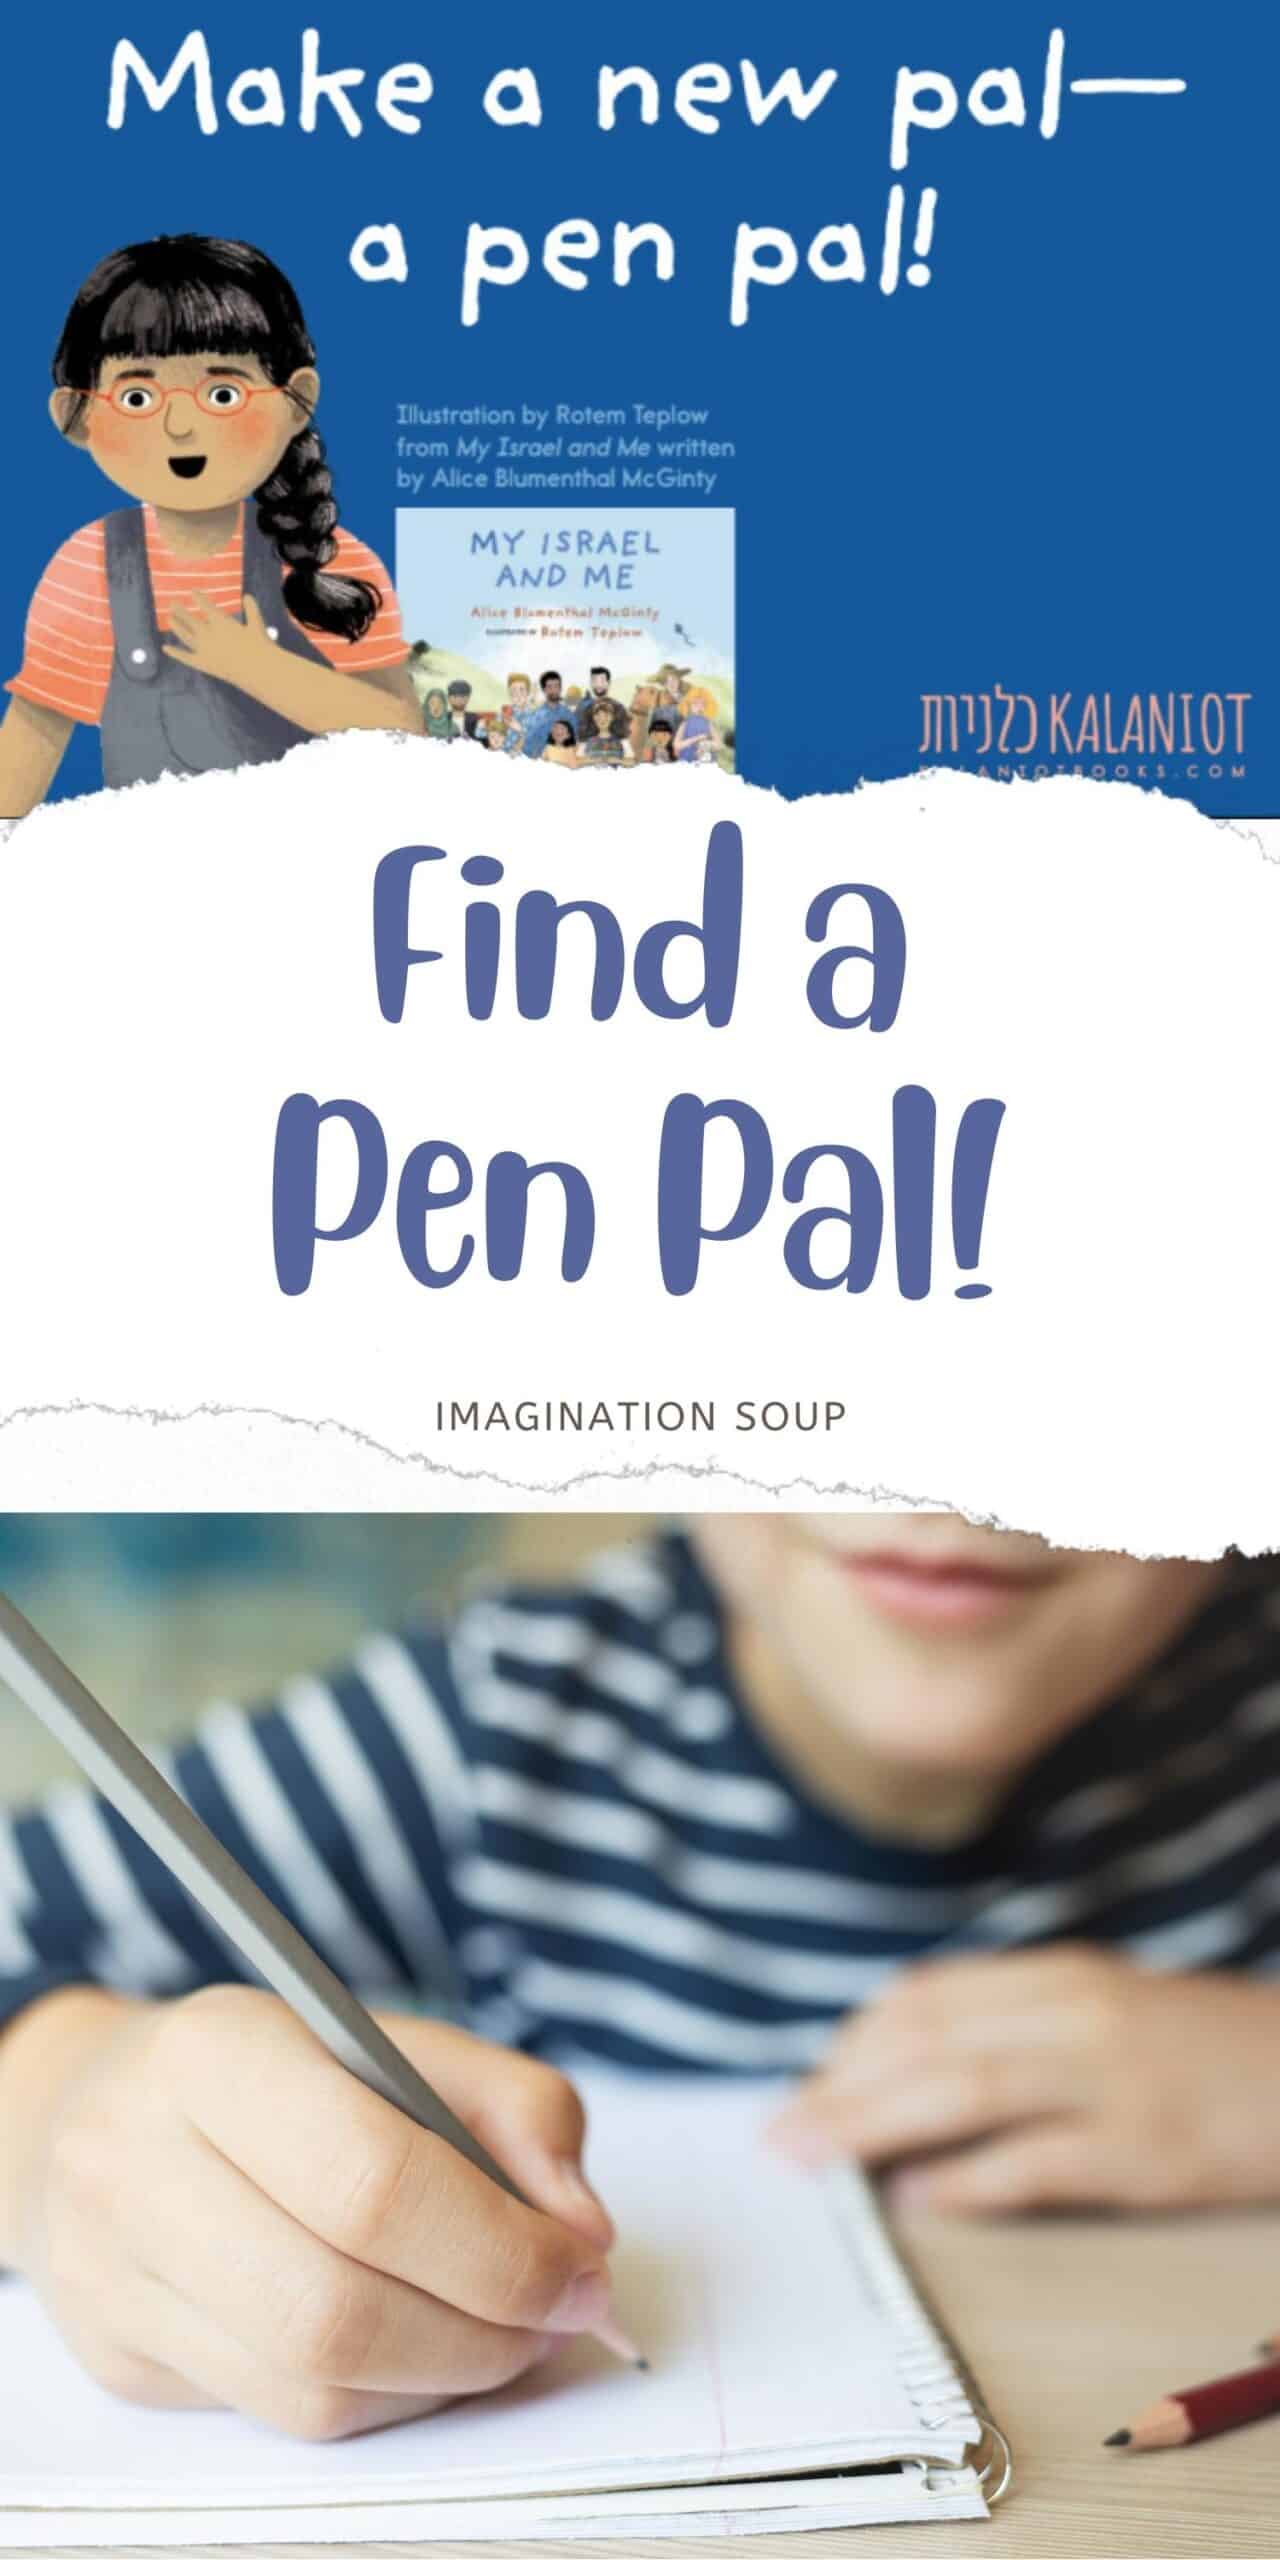 Find a pen pal and expand your world